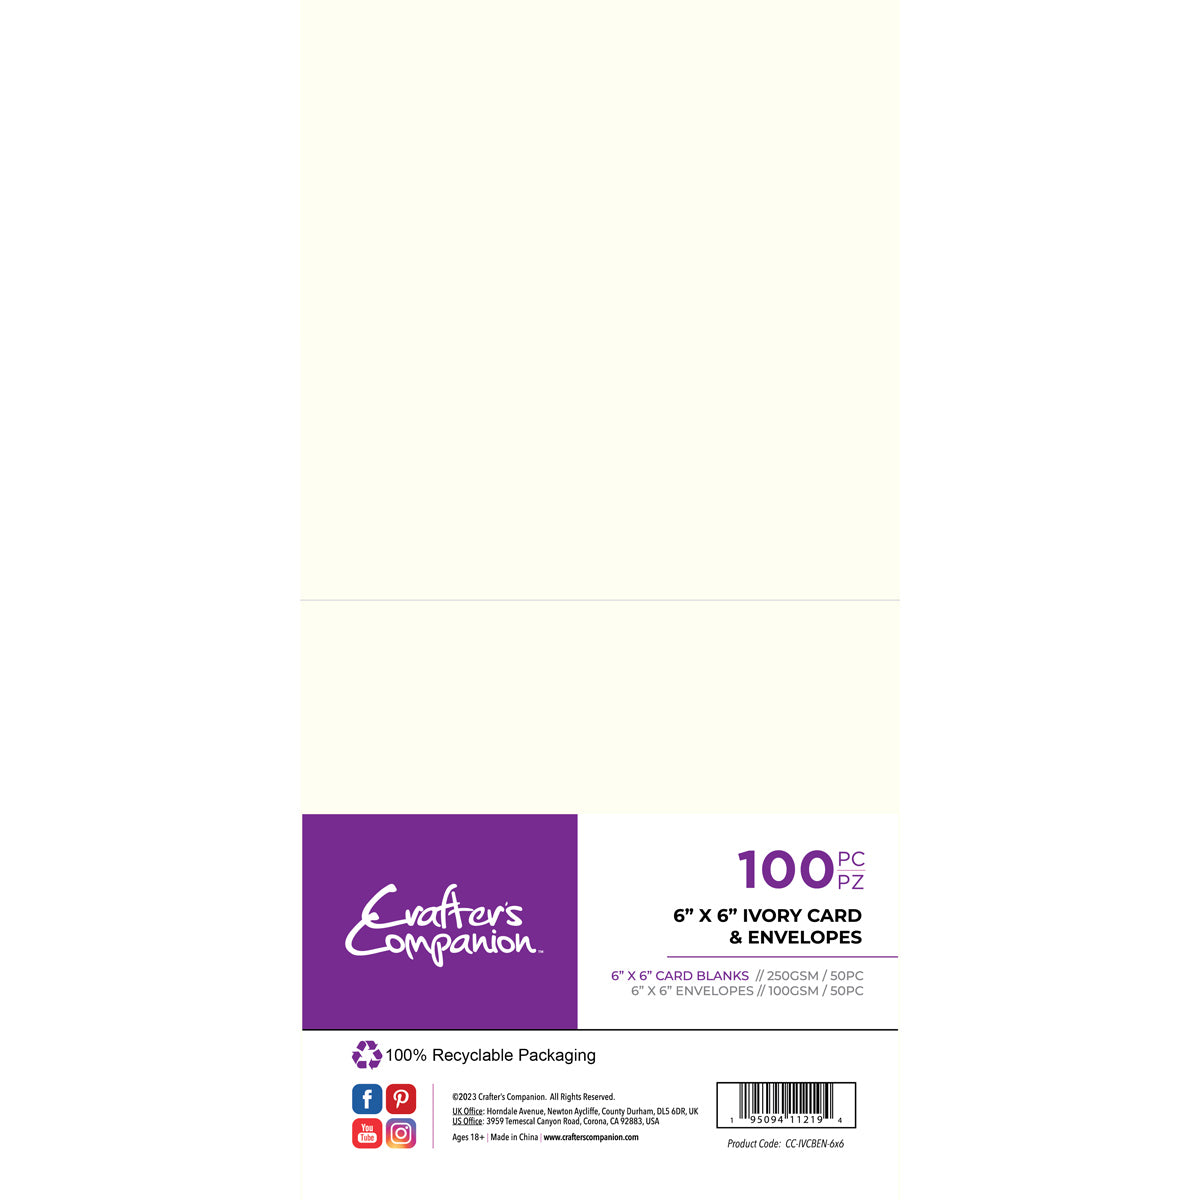 Crafter's Companion - 6"x 6" Card & Envelopes 100 piece - Ivory